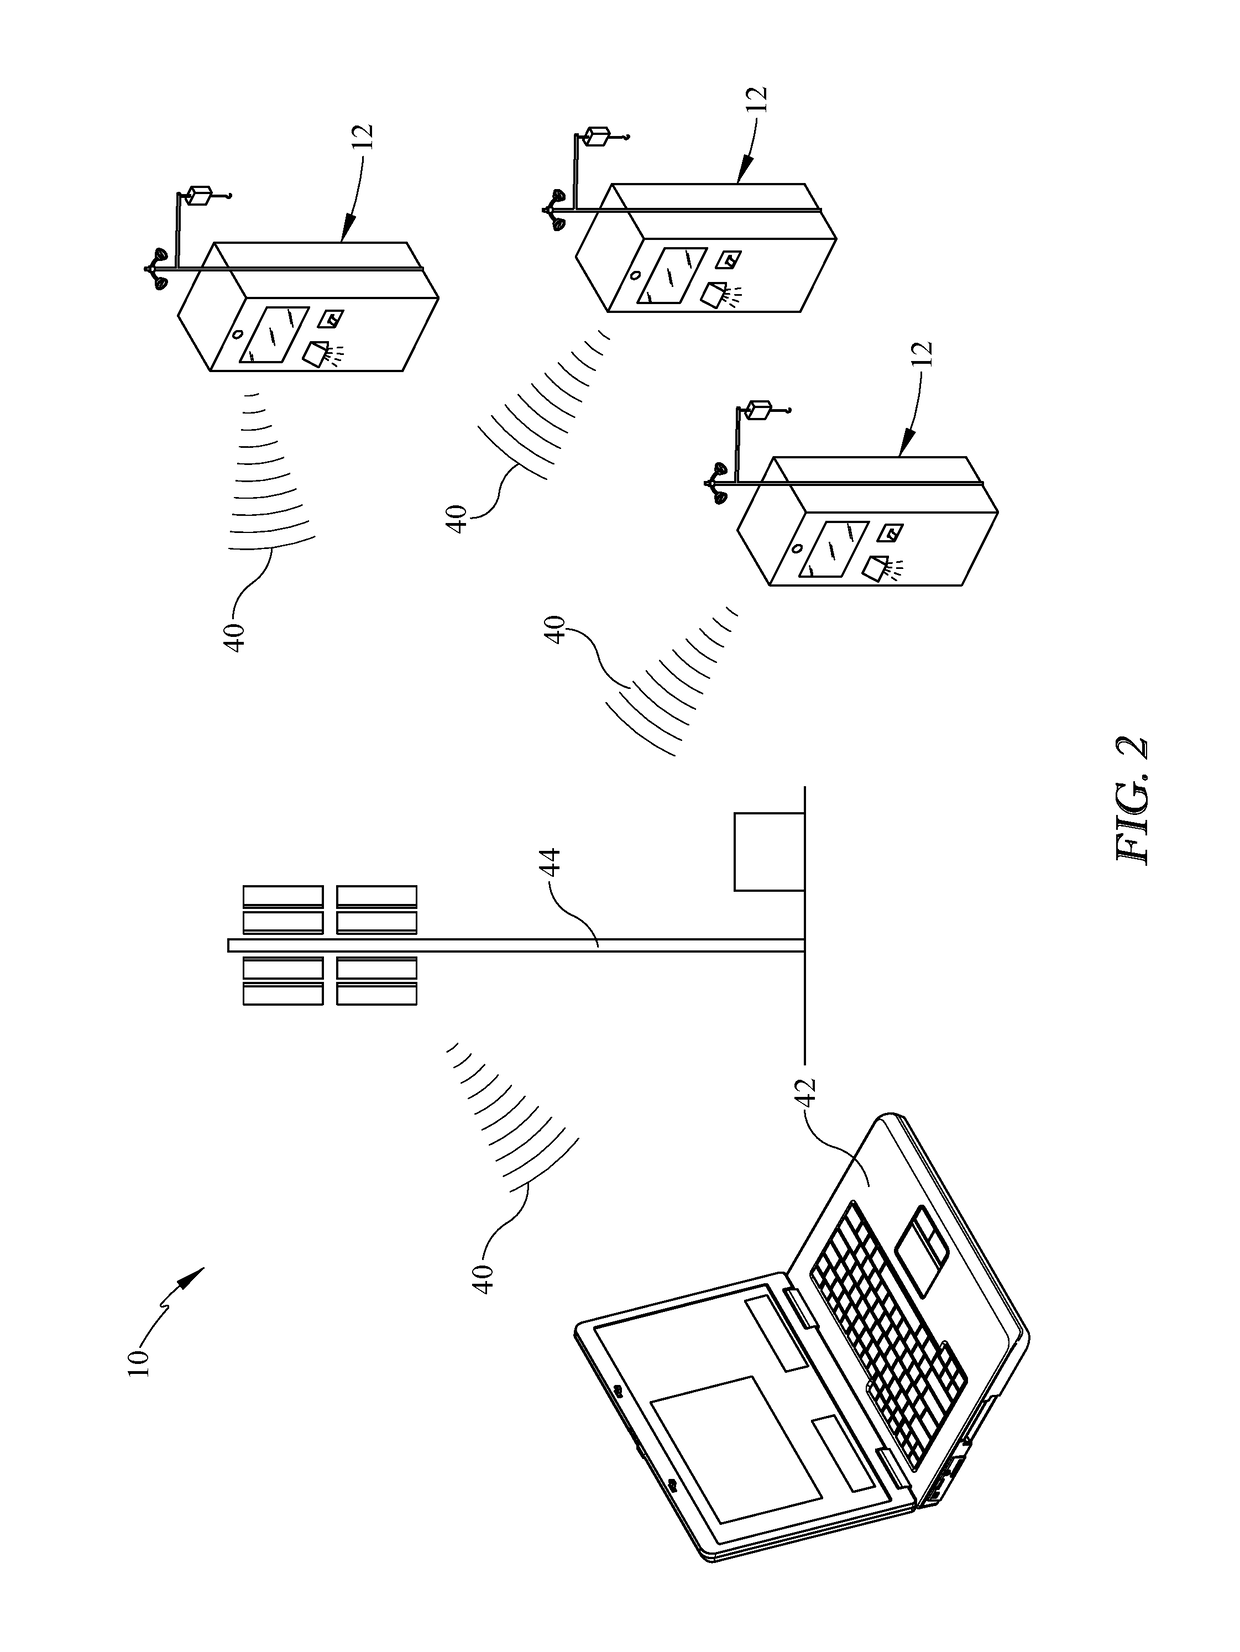 Fish kiosk for weighing and transmitting fish weight and method for its use